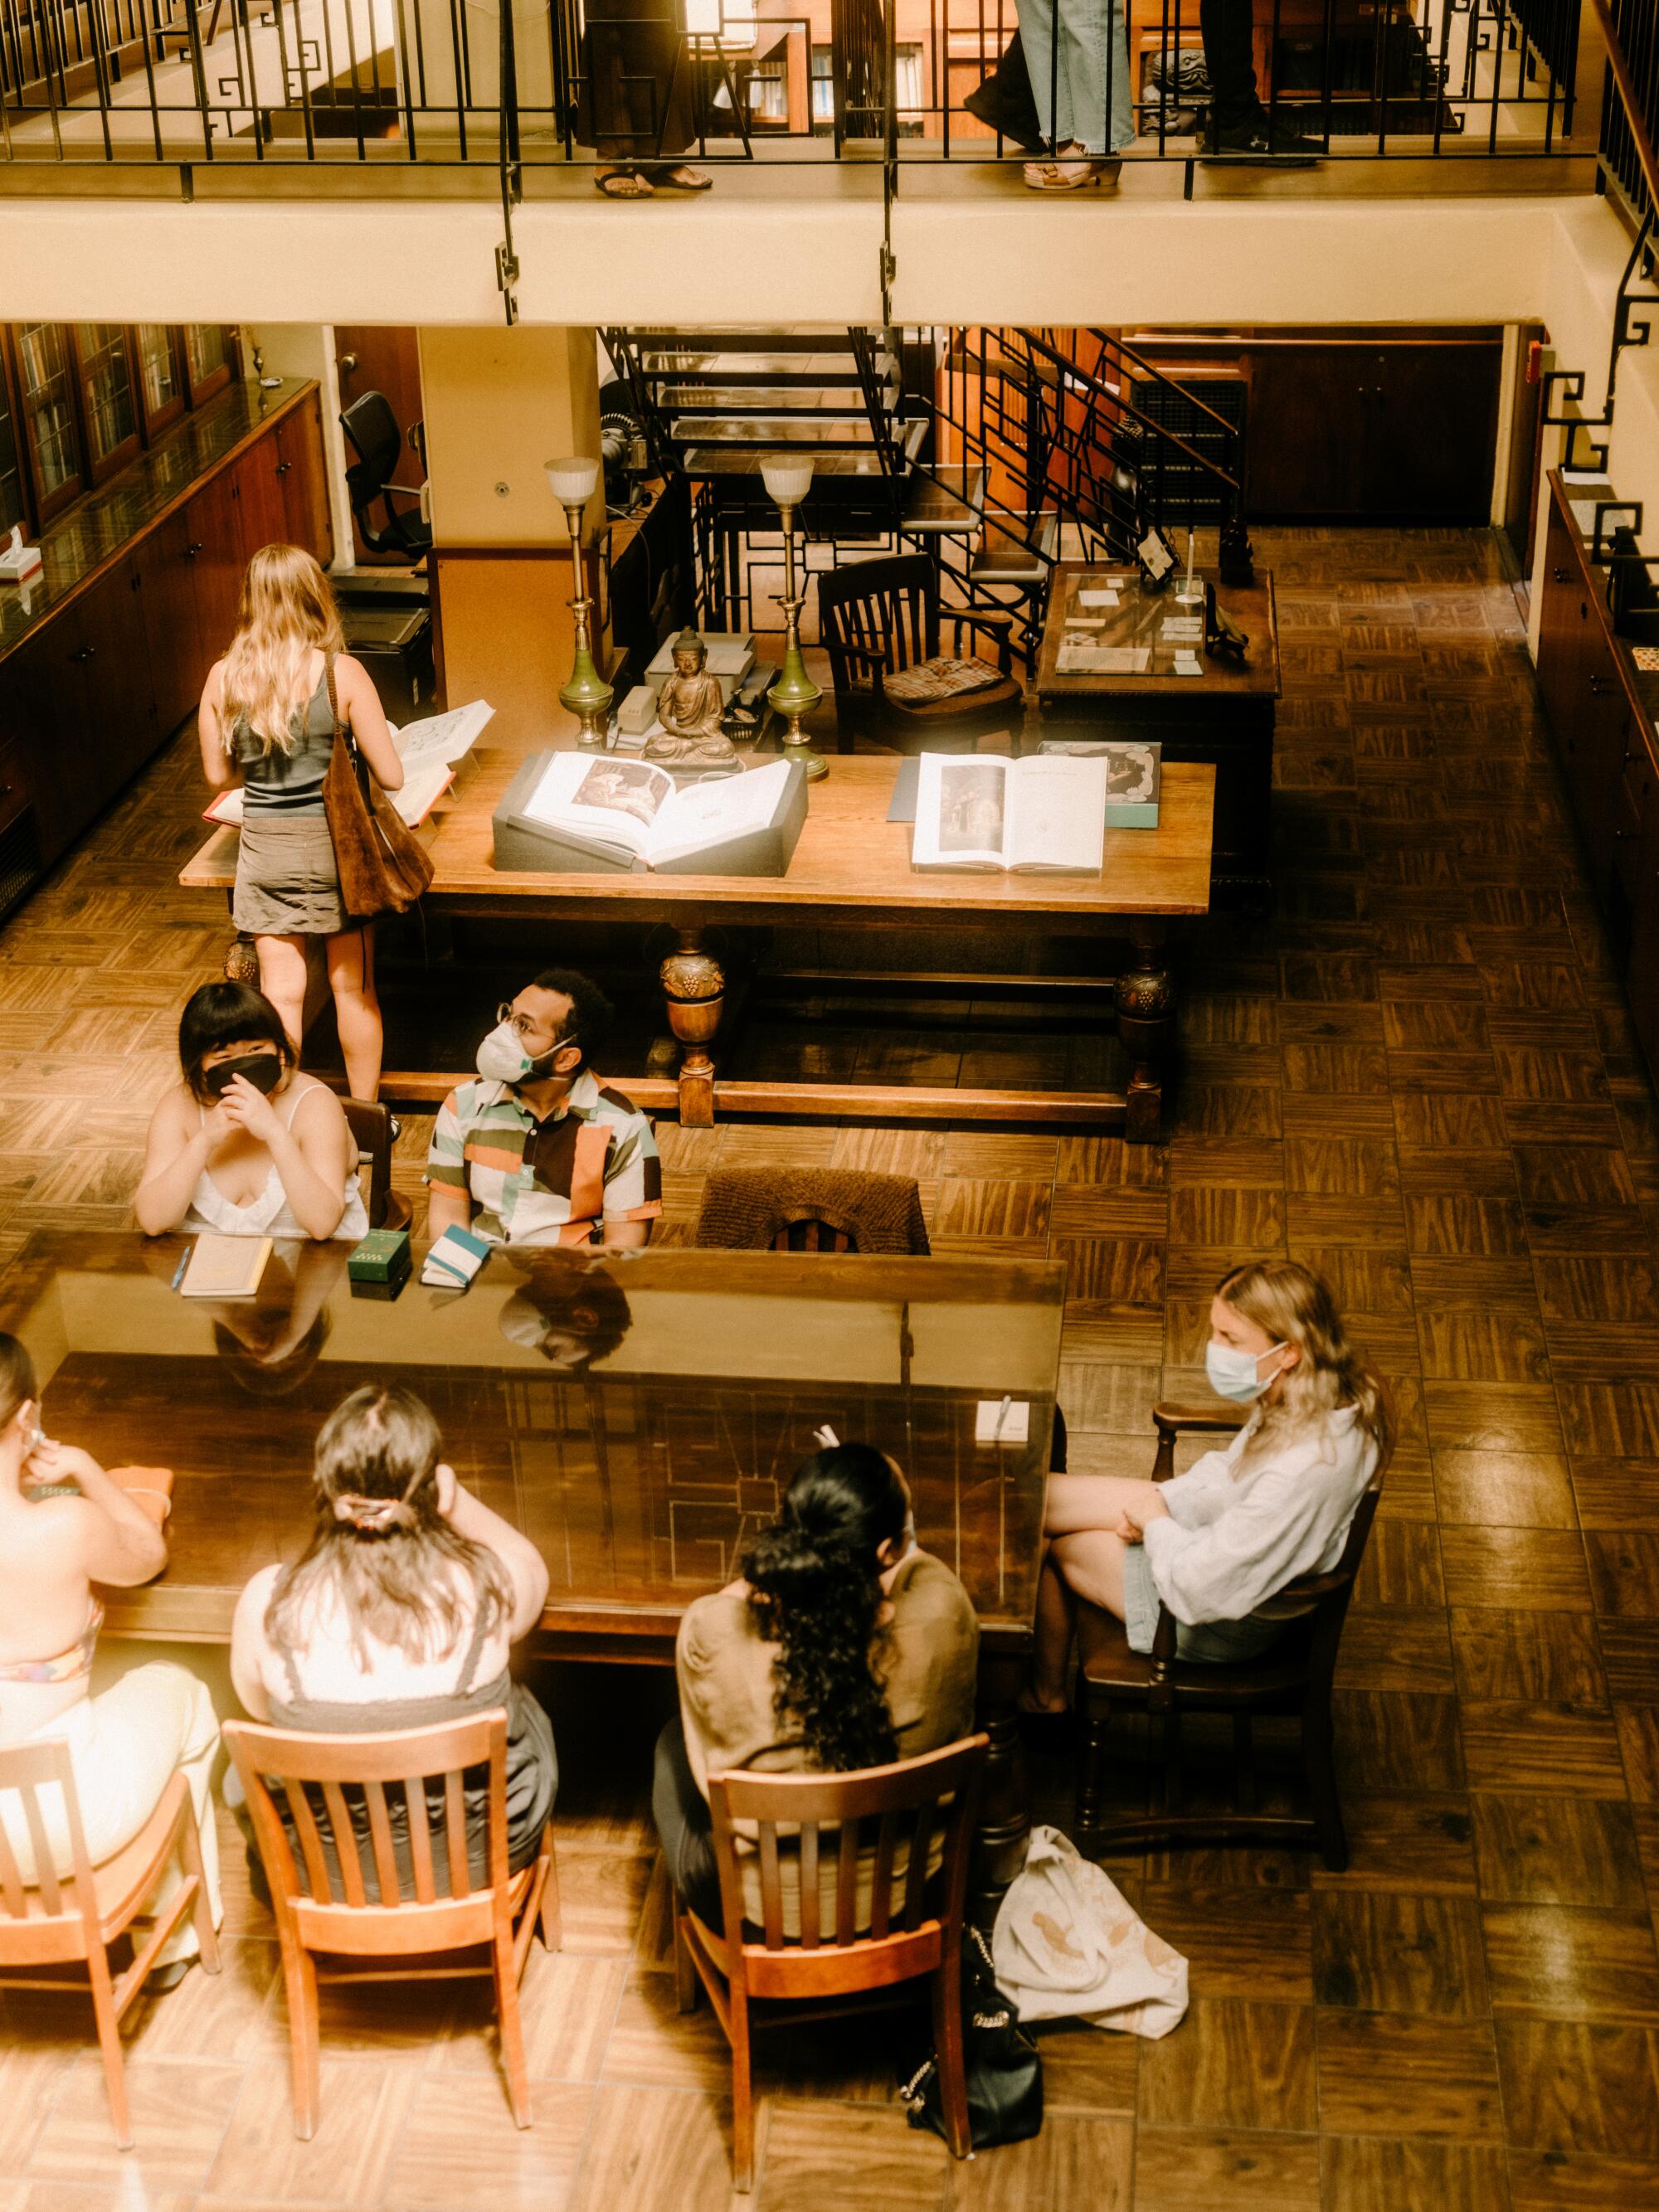 A view from above of people seated at wooden tables in a library